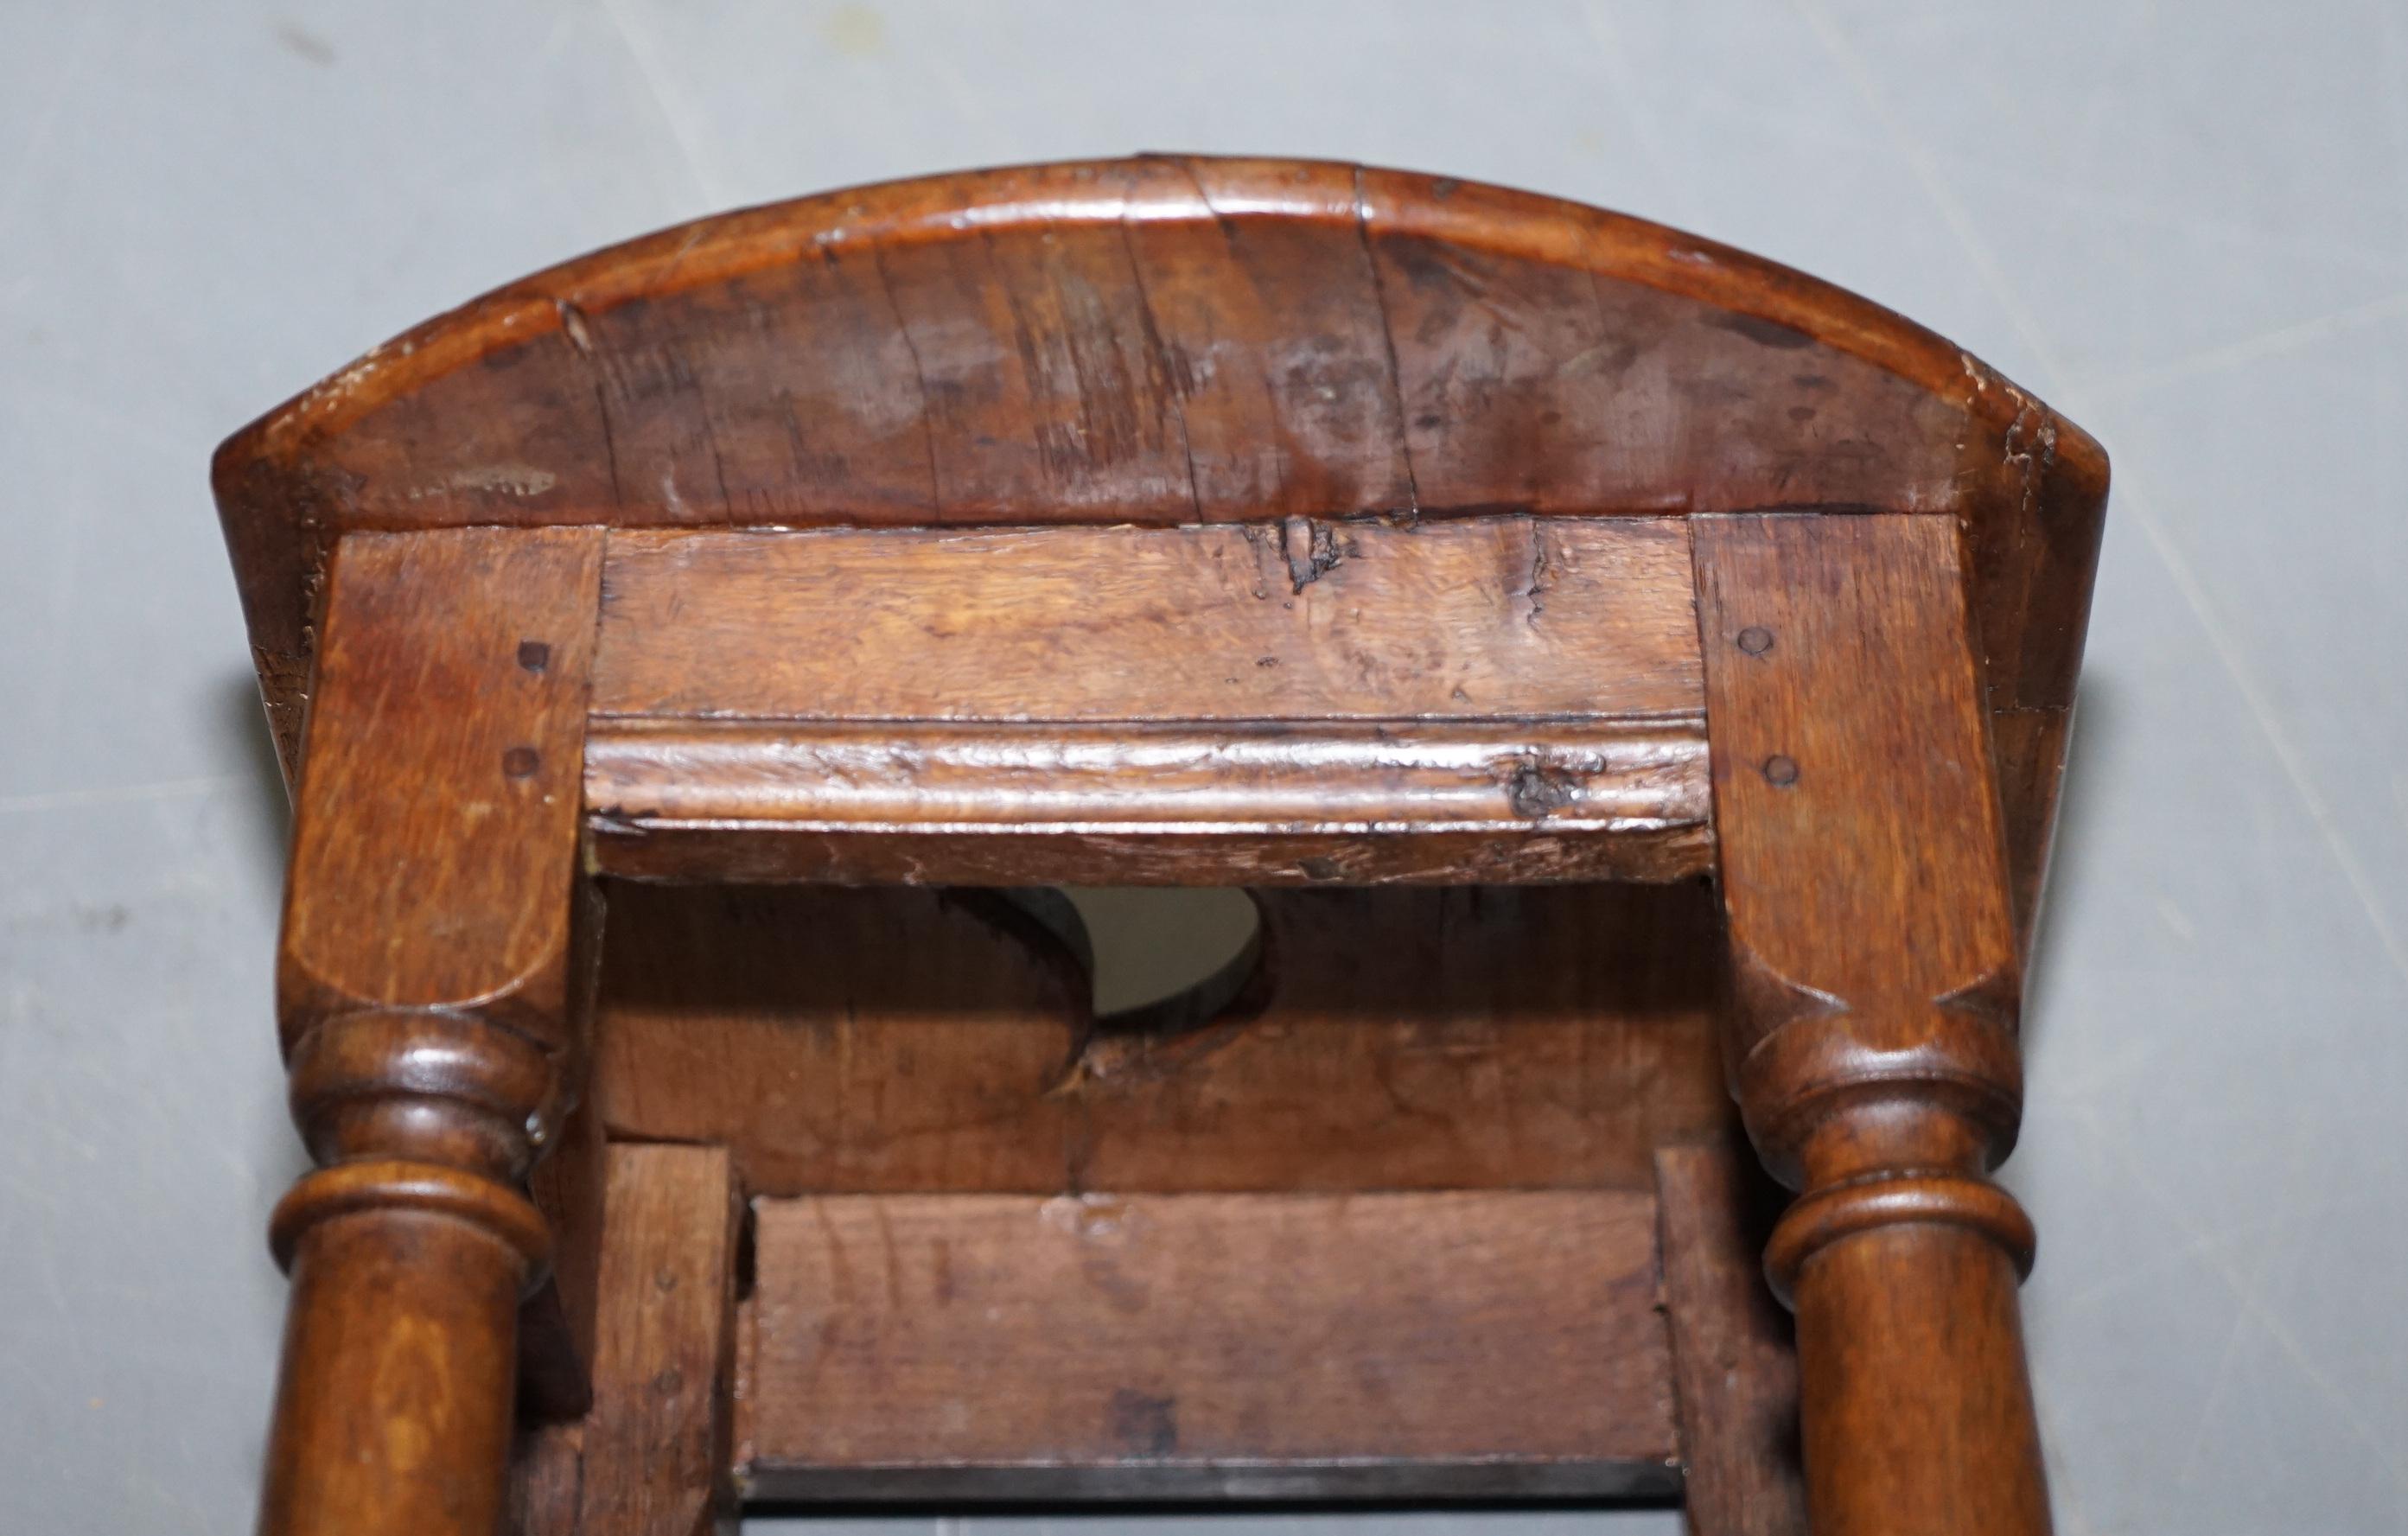 Lovely 18th Century Dutch Stool with Handle Cut Out in the Top Bar Pub Study 9